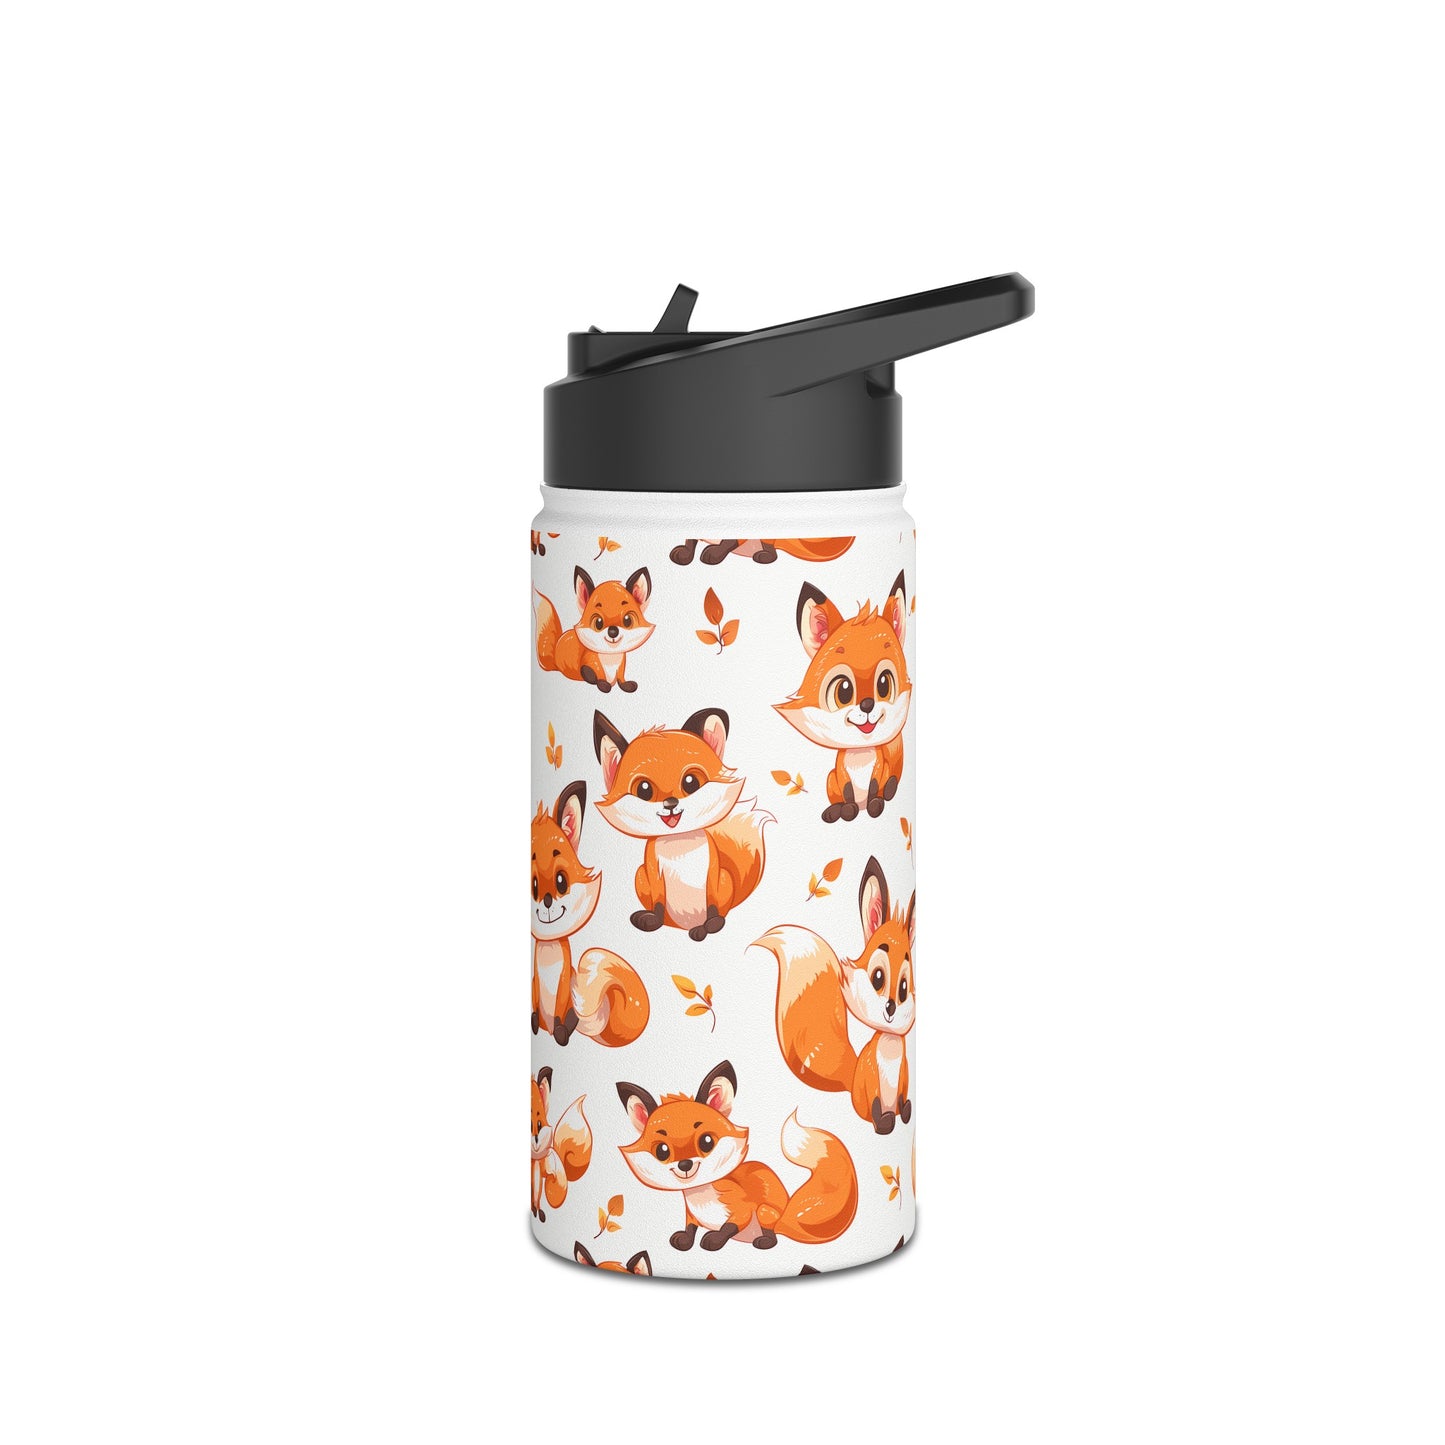 Insulated Water Bottle, 12oz, Cute Baby Foxes - Double Walled Stainless Steel Thermos, Keeps Drinks Hot or Cold